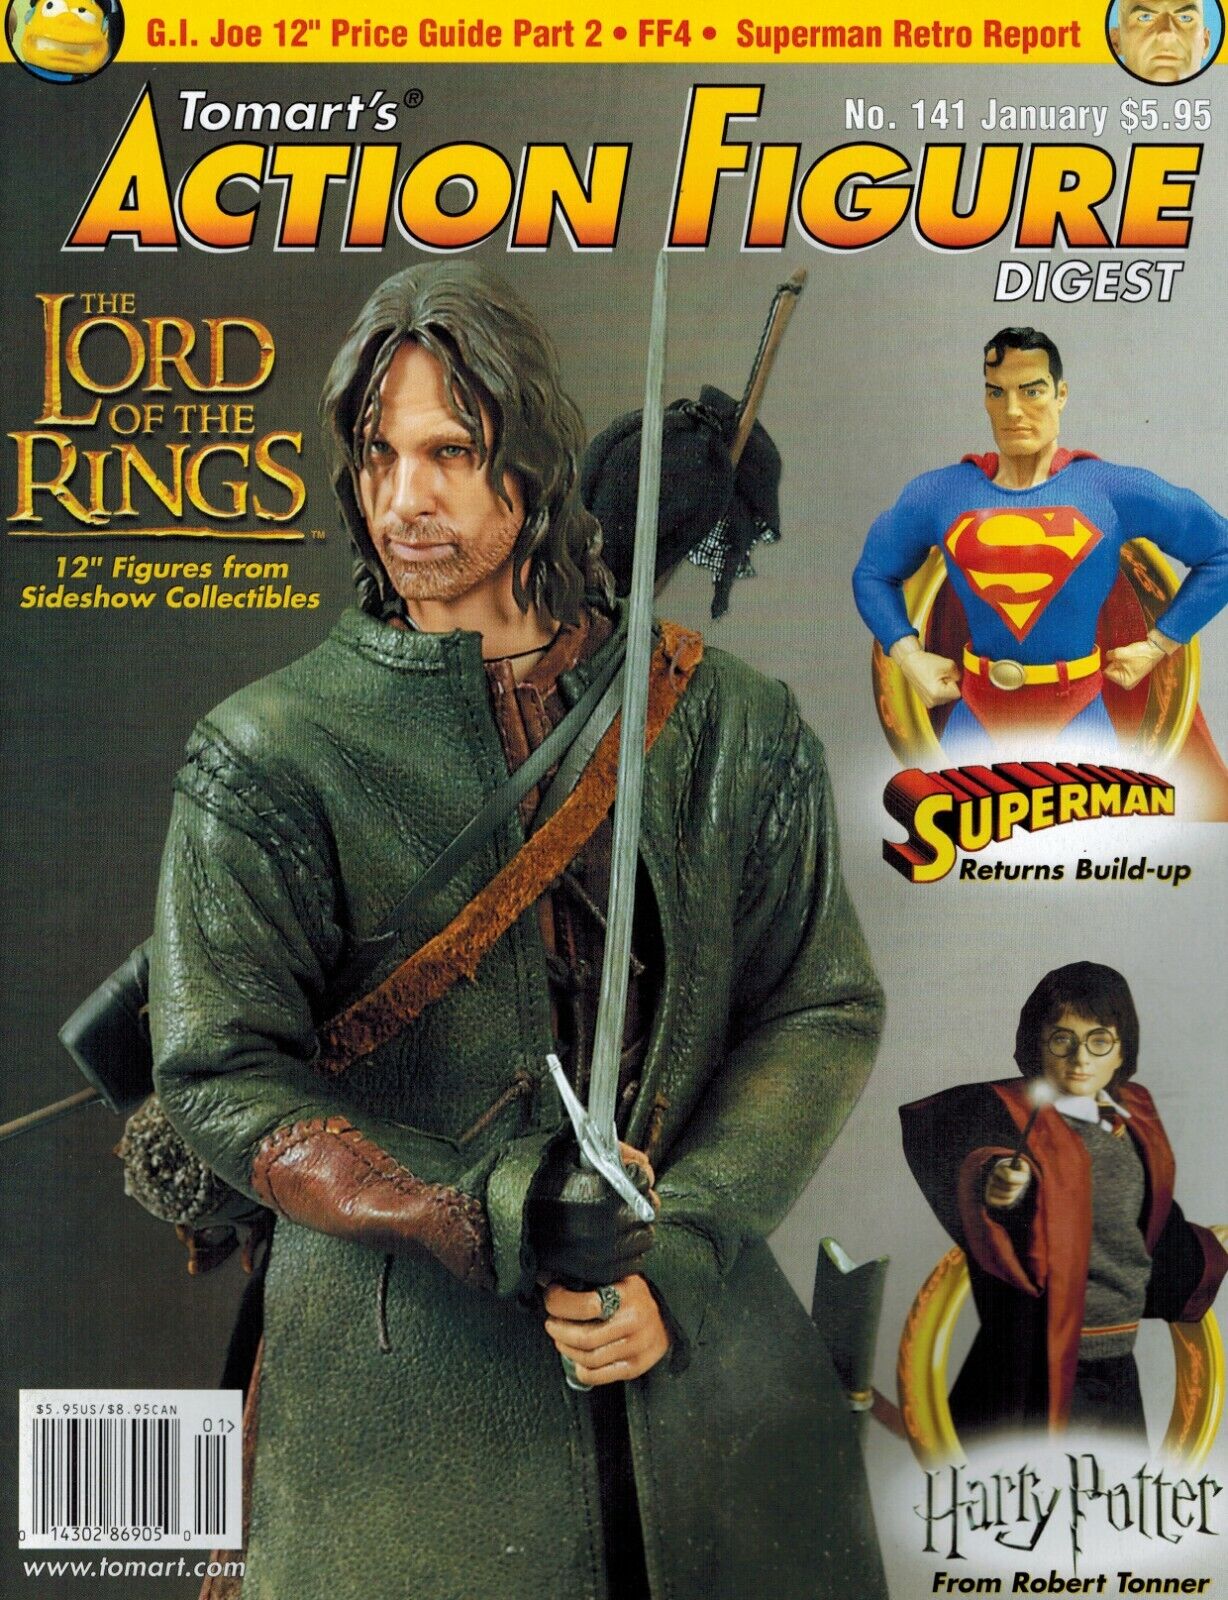 Tomart's Action Figure Digest Magazine #141 January 2006 Lord of the Rings